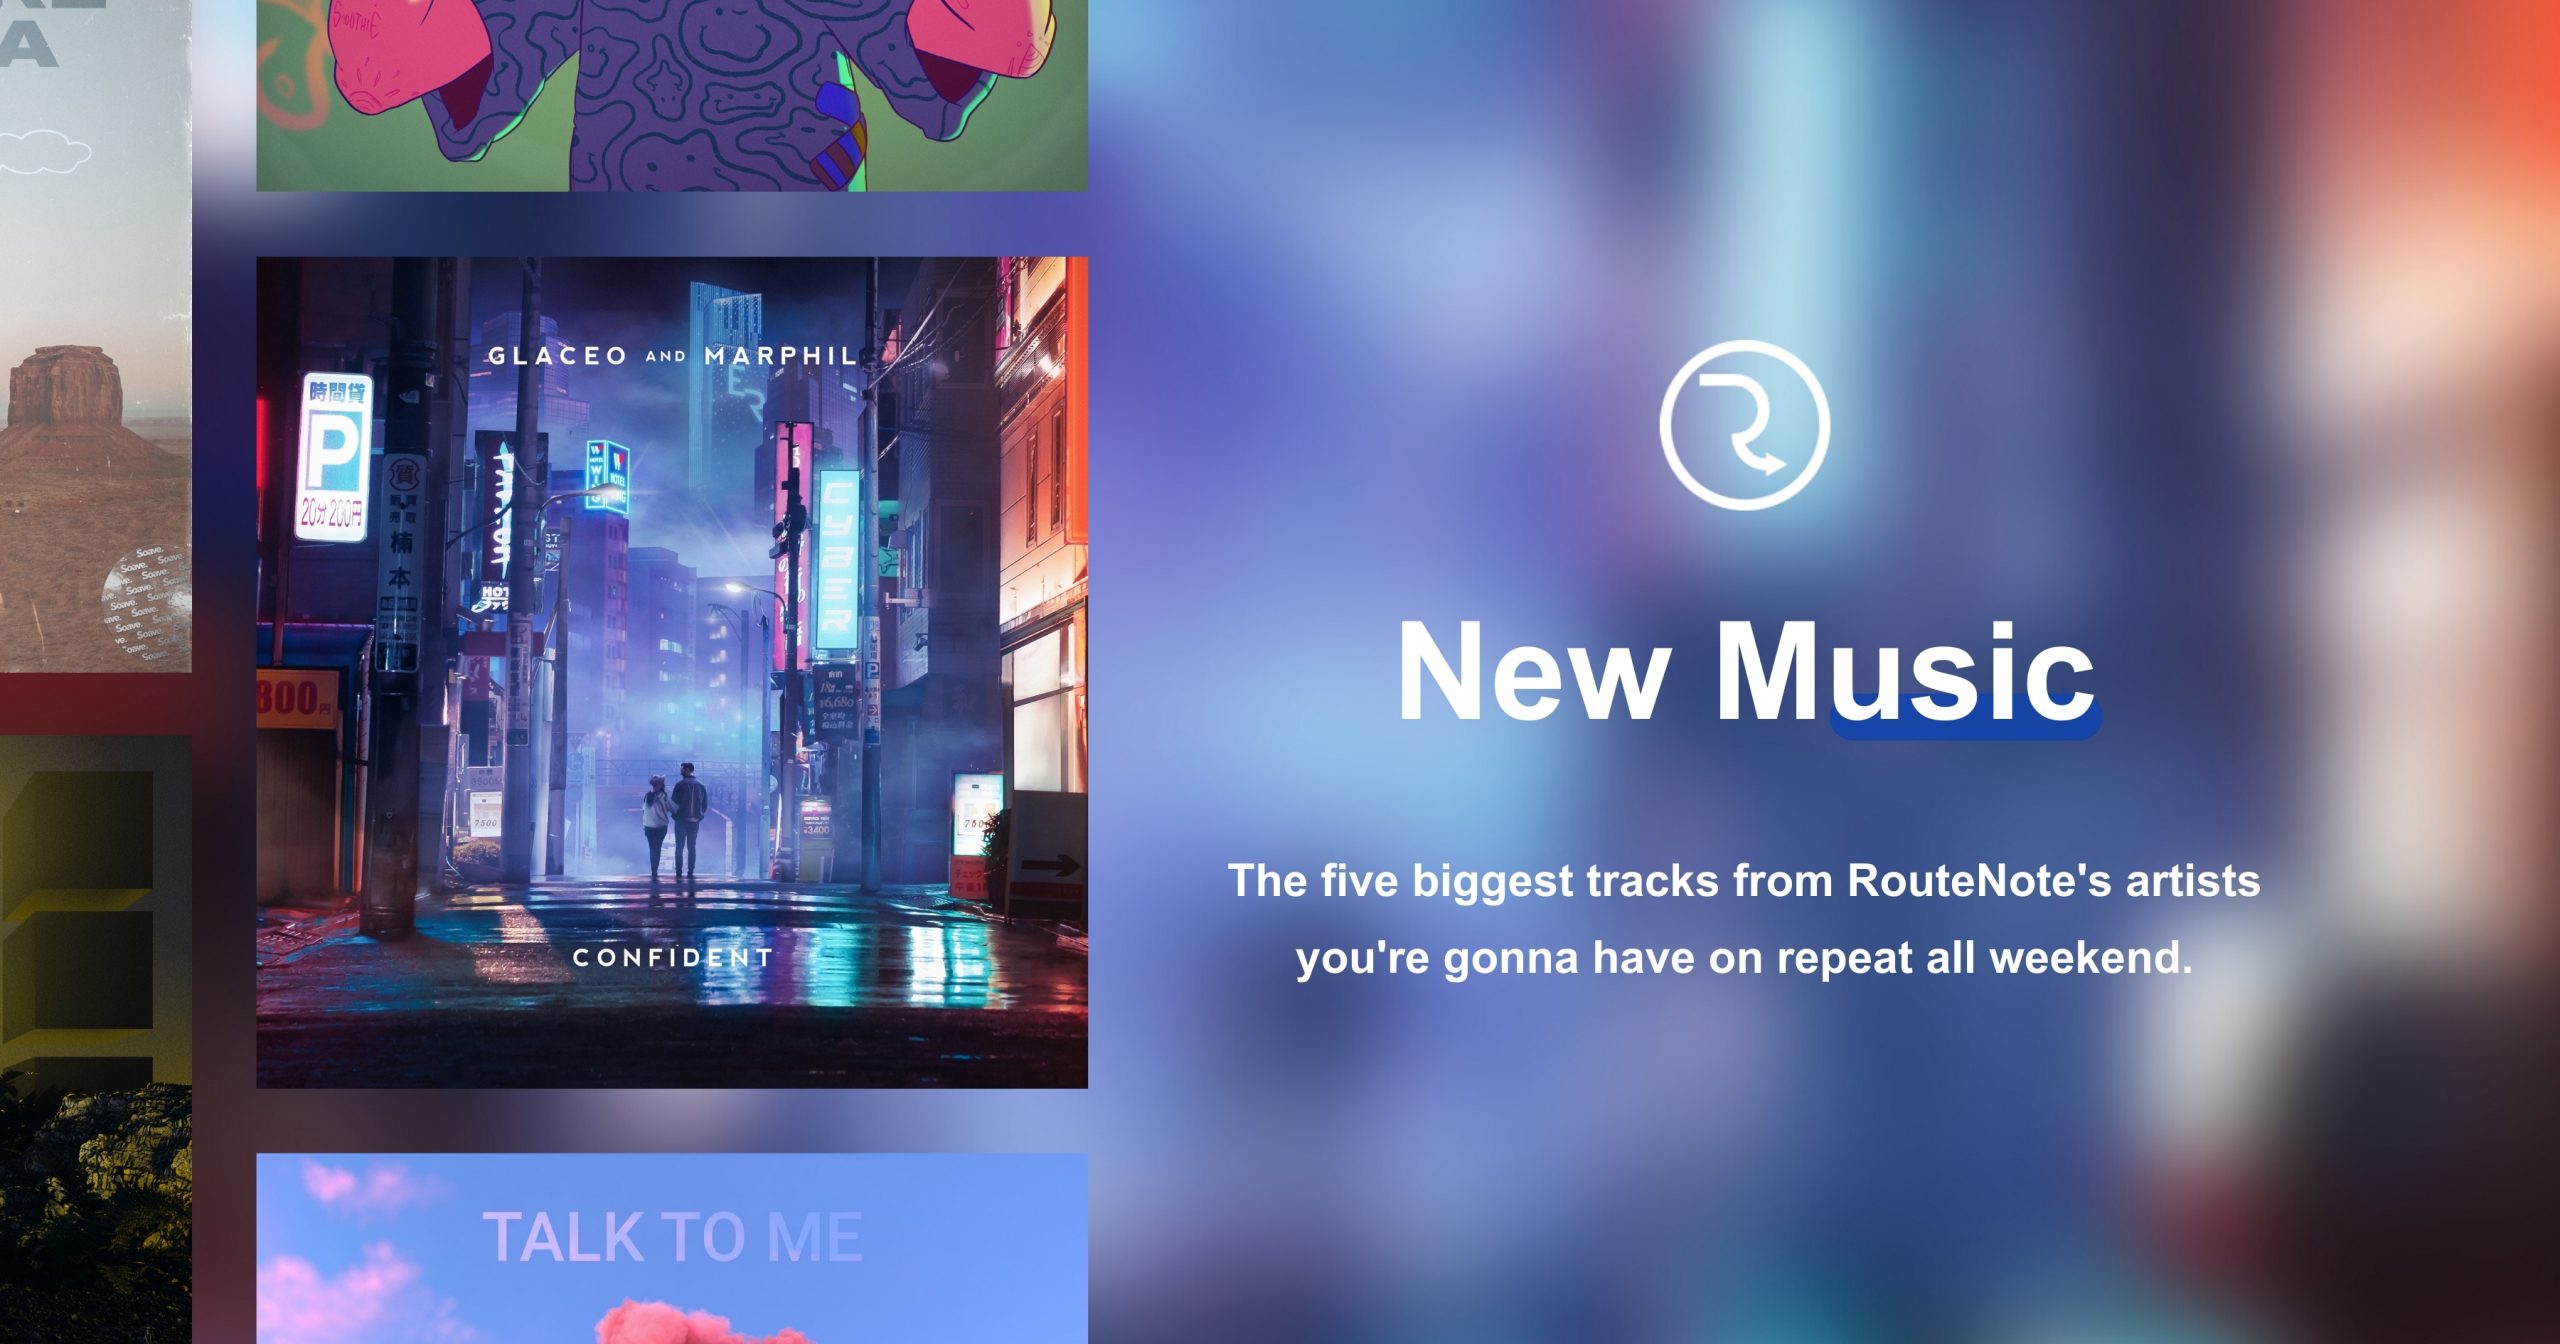 RouteNote’s New Music Releases 25th June, 2021: Five of the hottest tracks out today